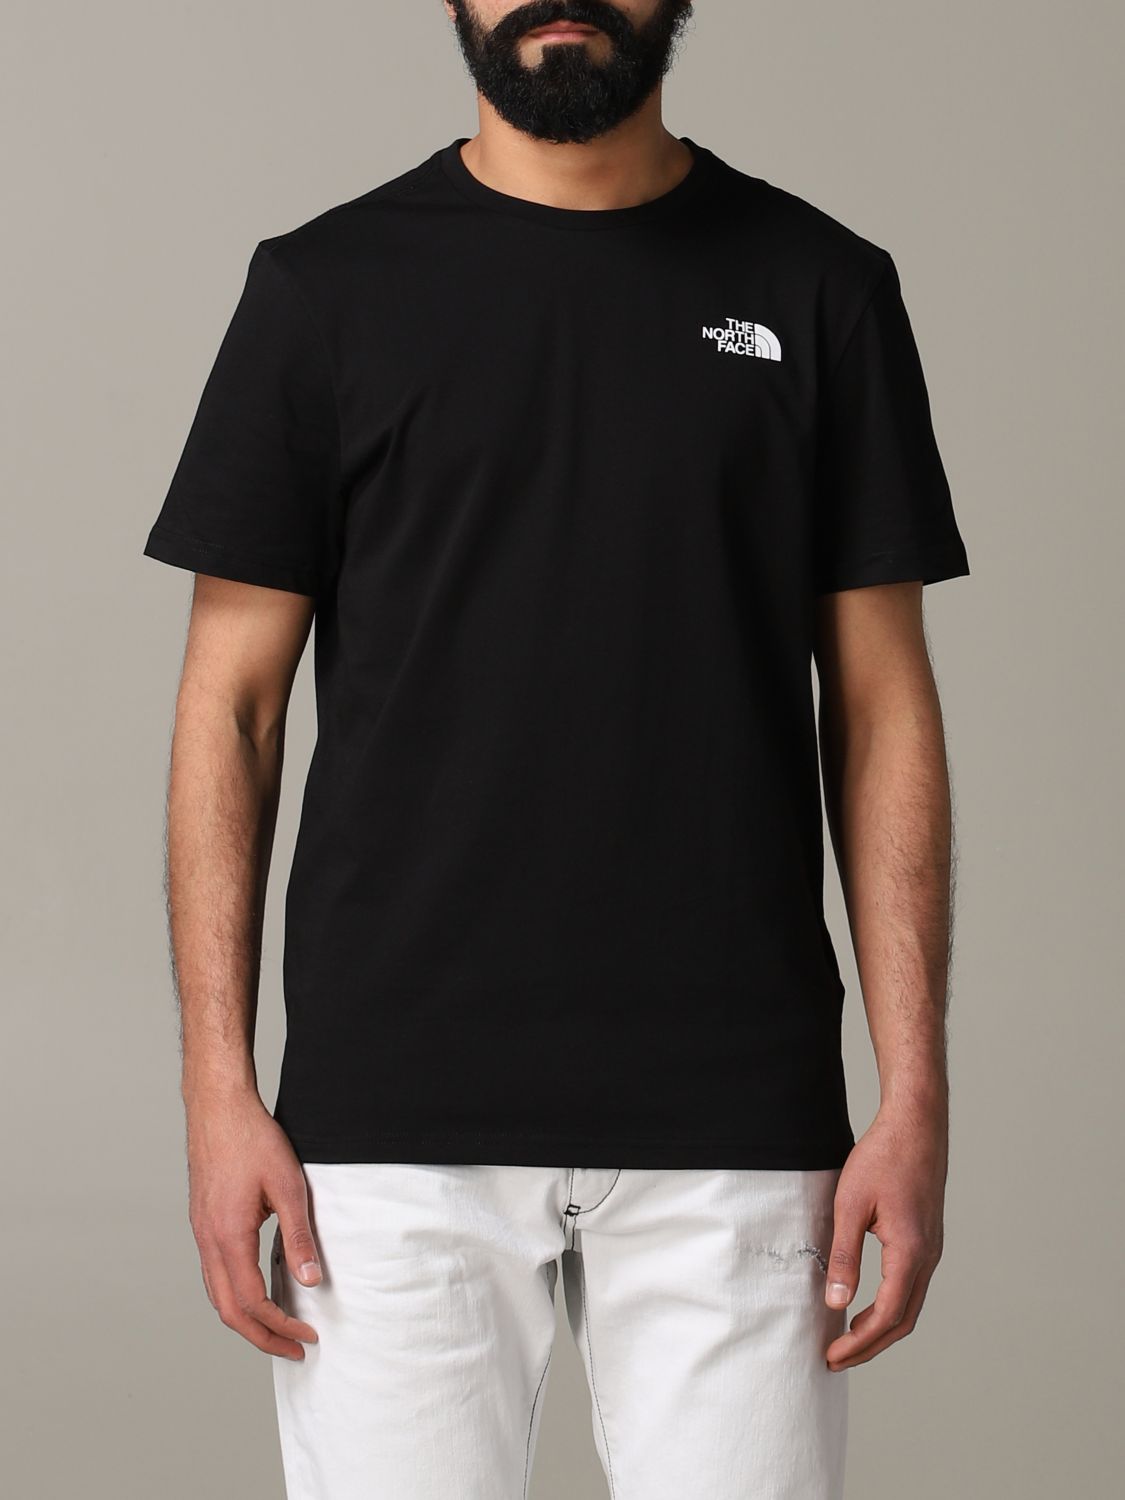 The North Face Outlet: T-shirt men | T 